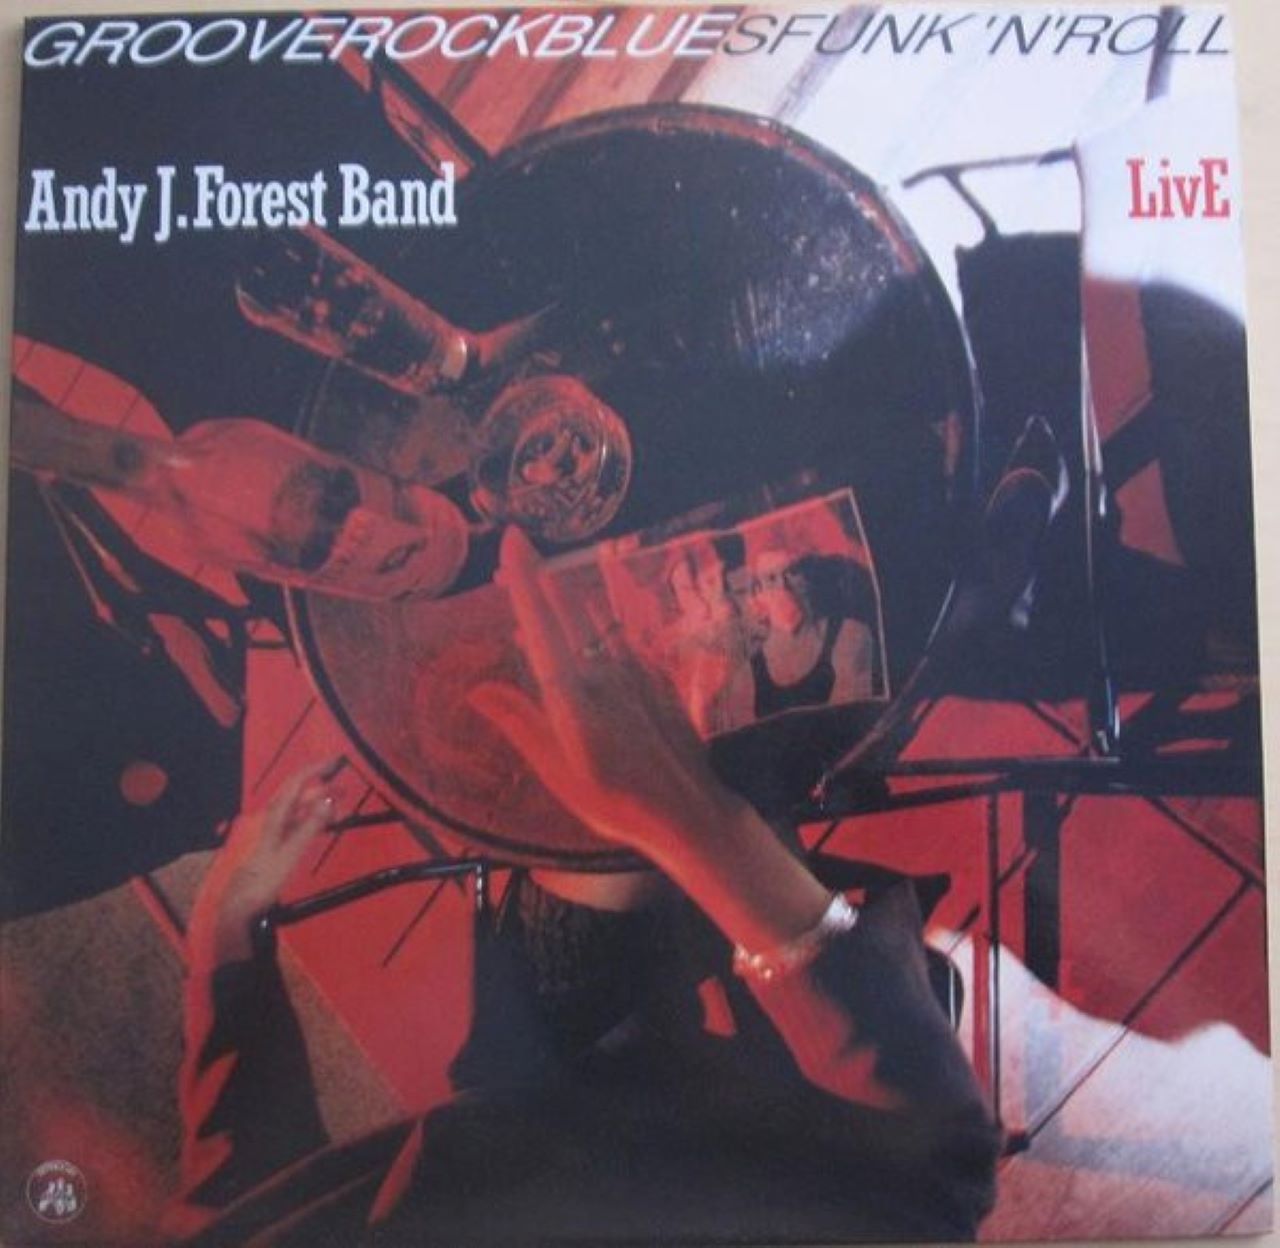 Andy J. Forest Band - Live cover album